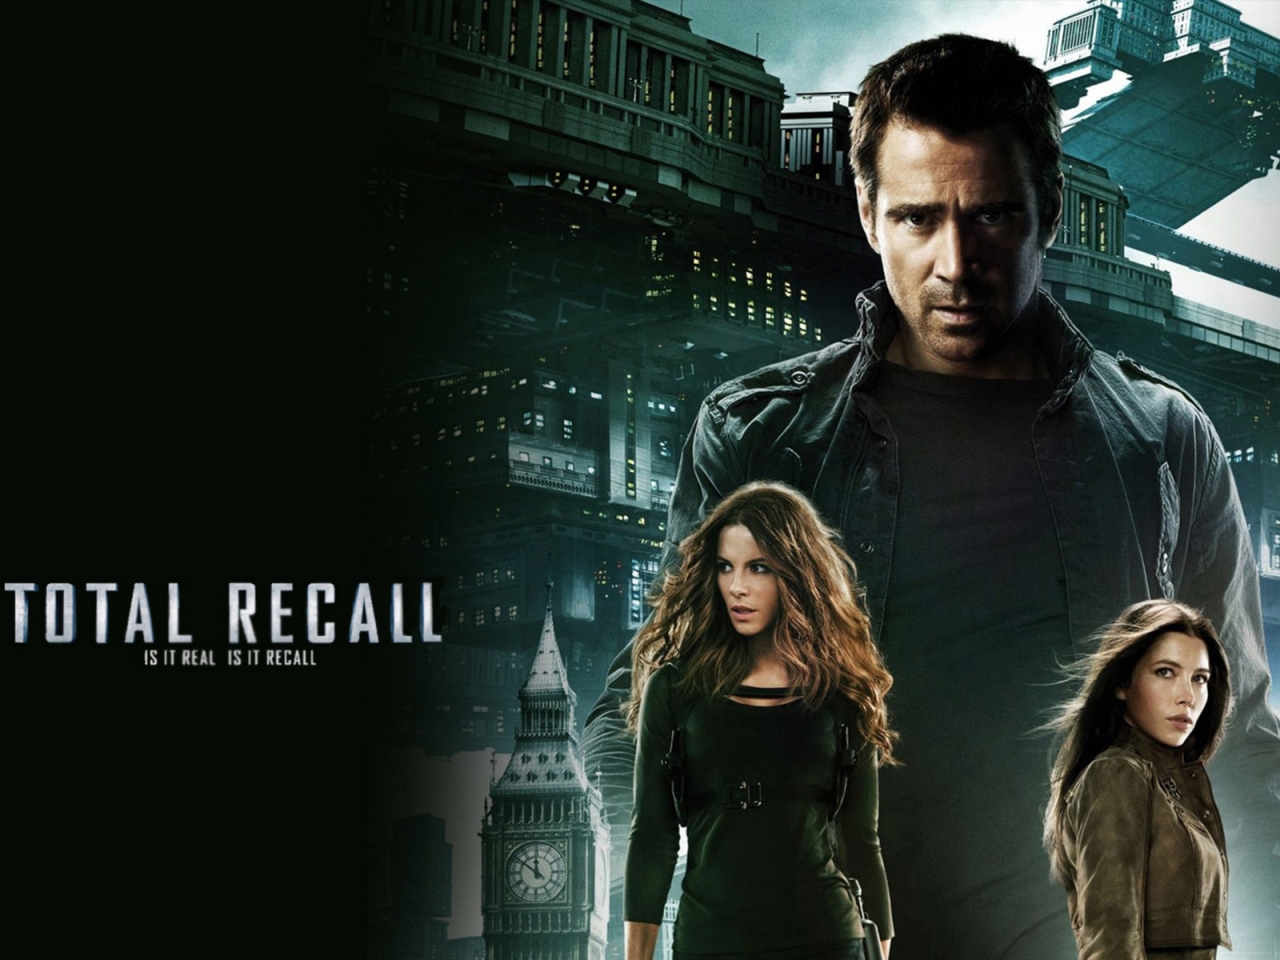 Total Recall Poster for 1280 x 960 resolution